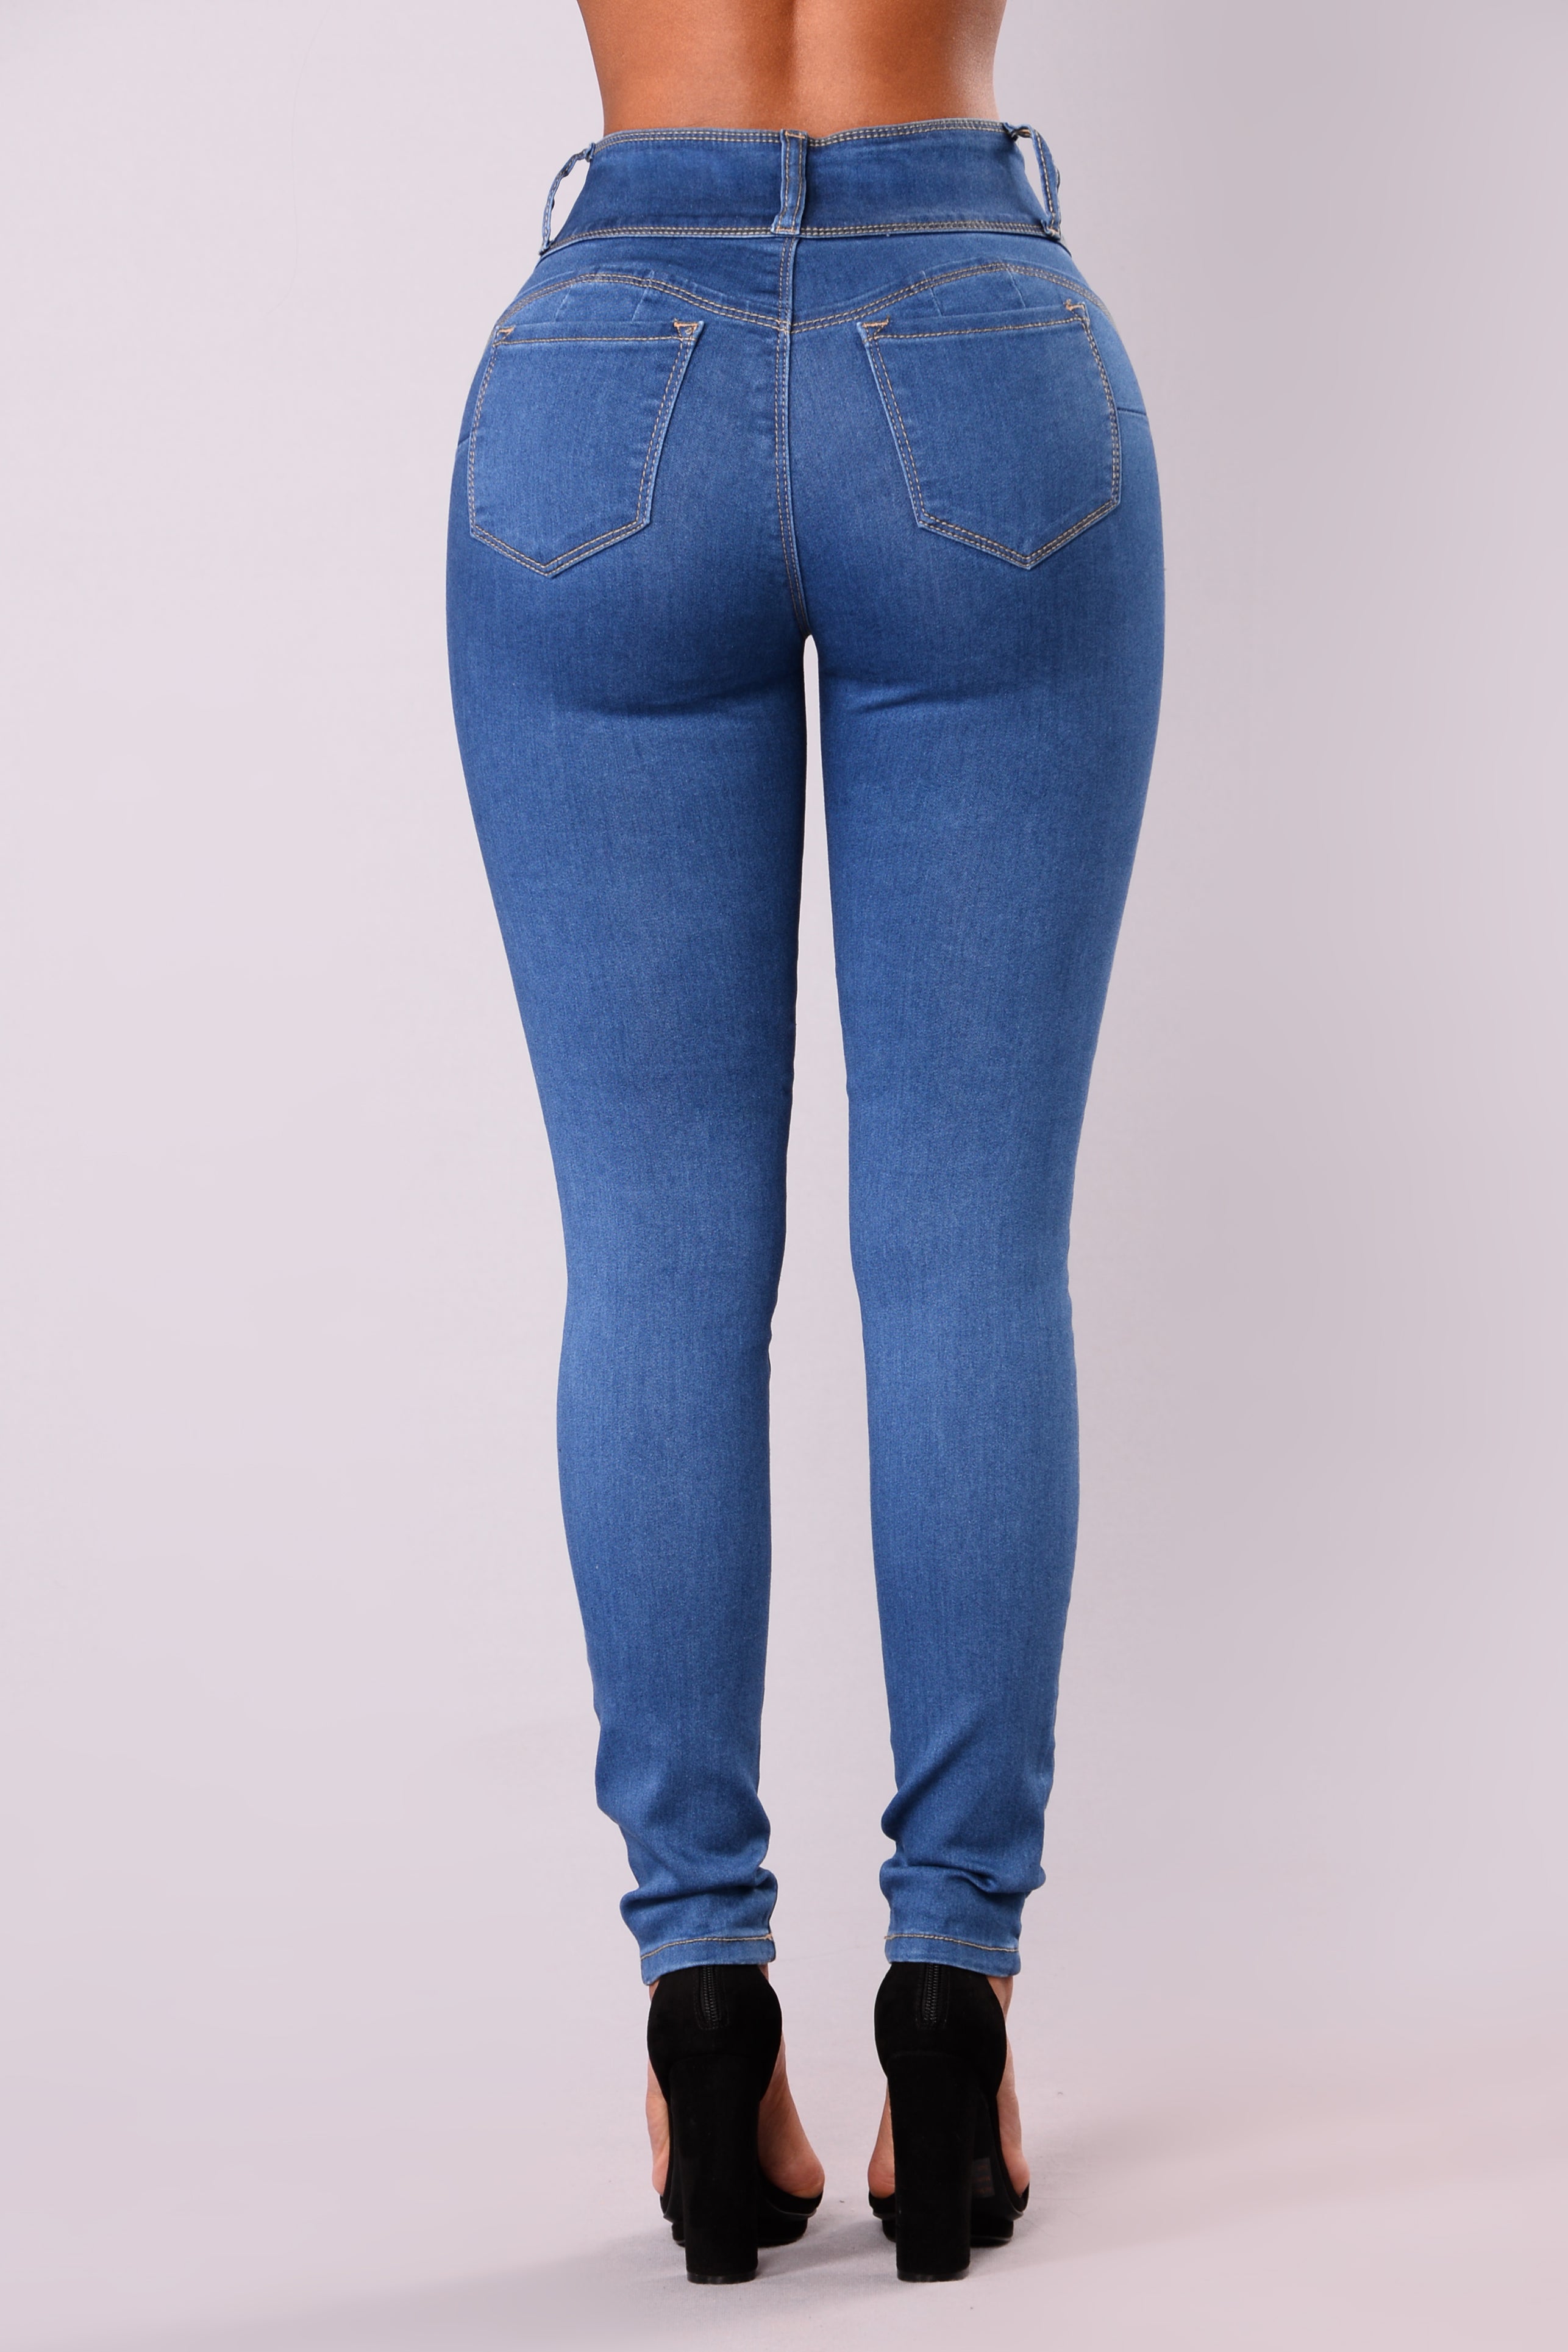 Round Of Applause Booty Shaped Jeans Medium 8308